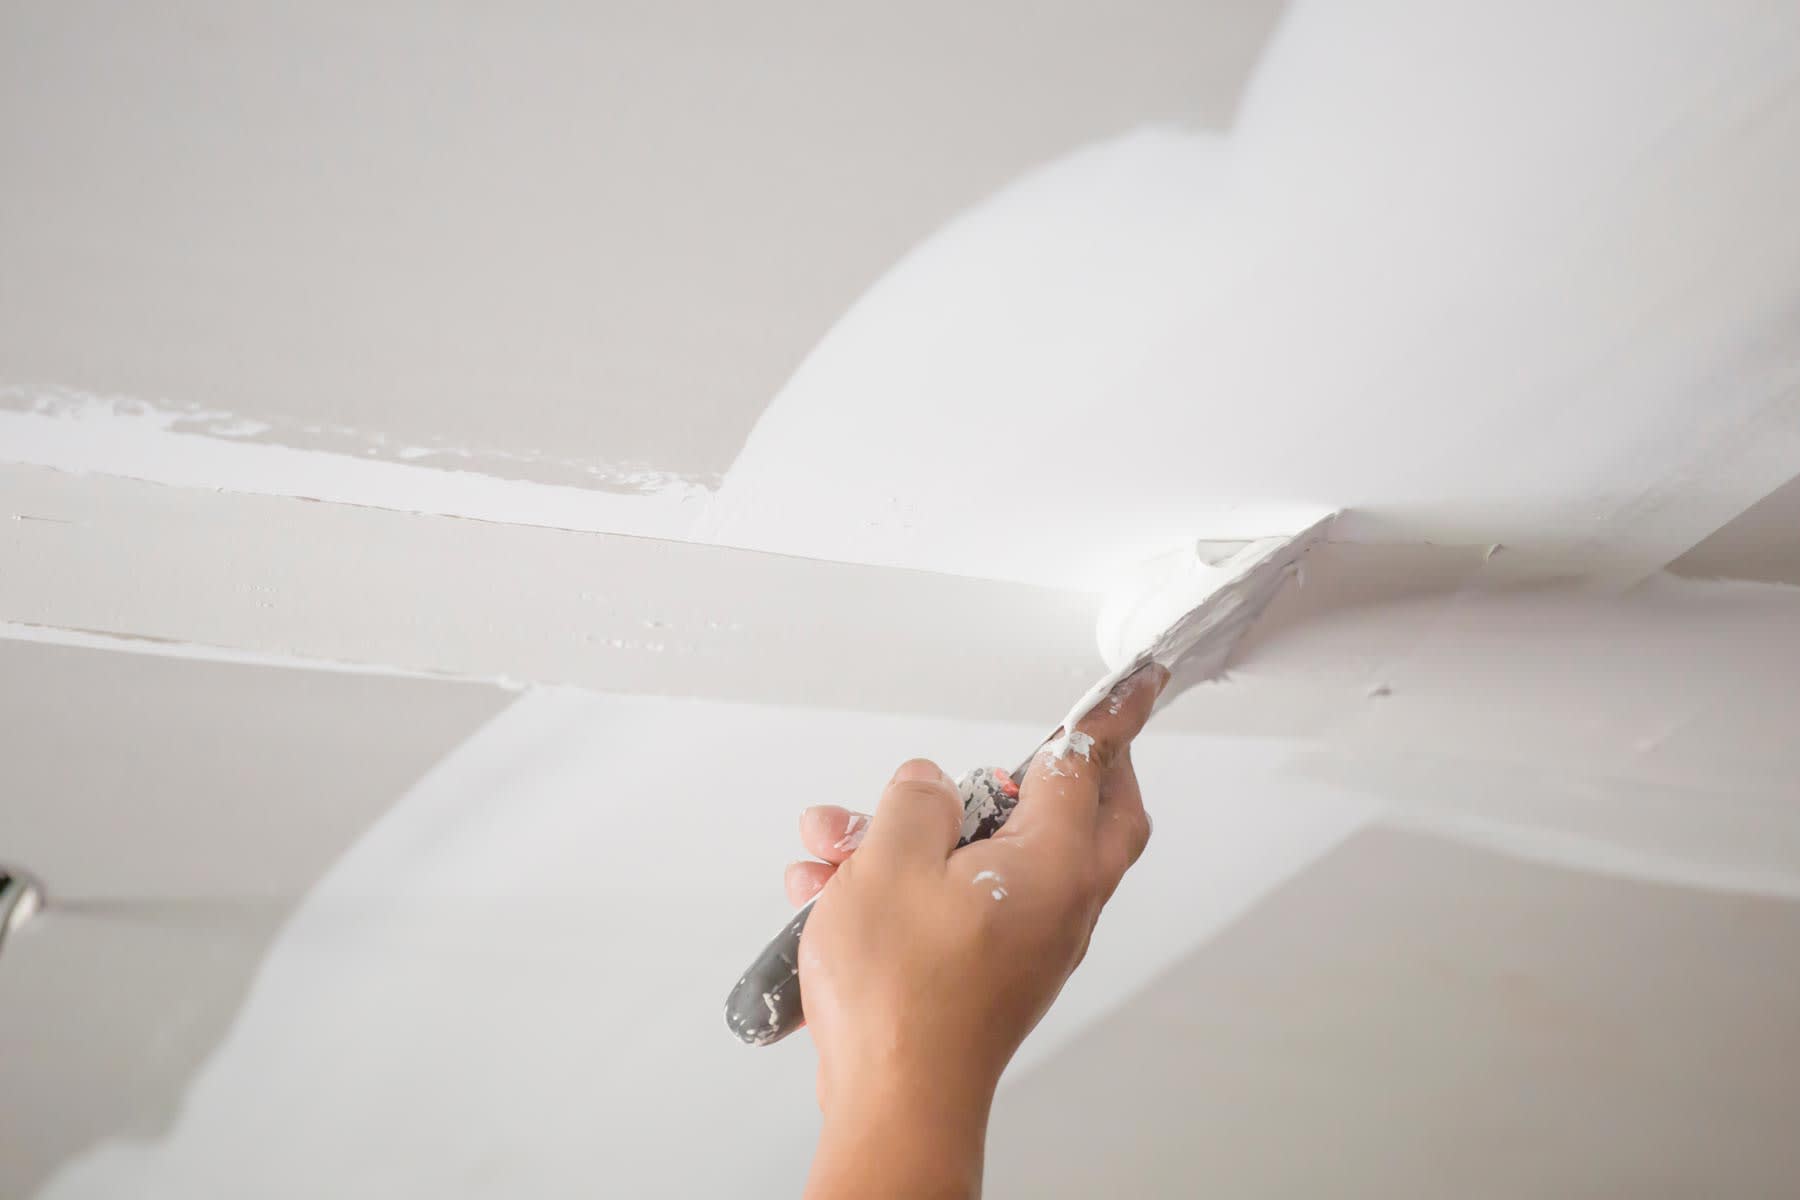 Find a drywall repair contractor near you